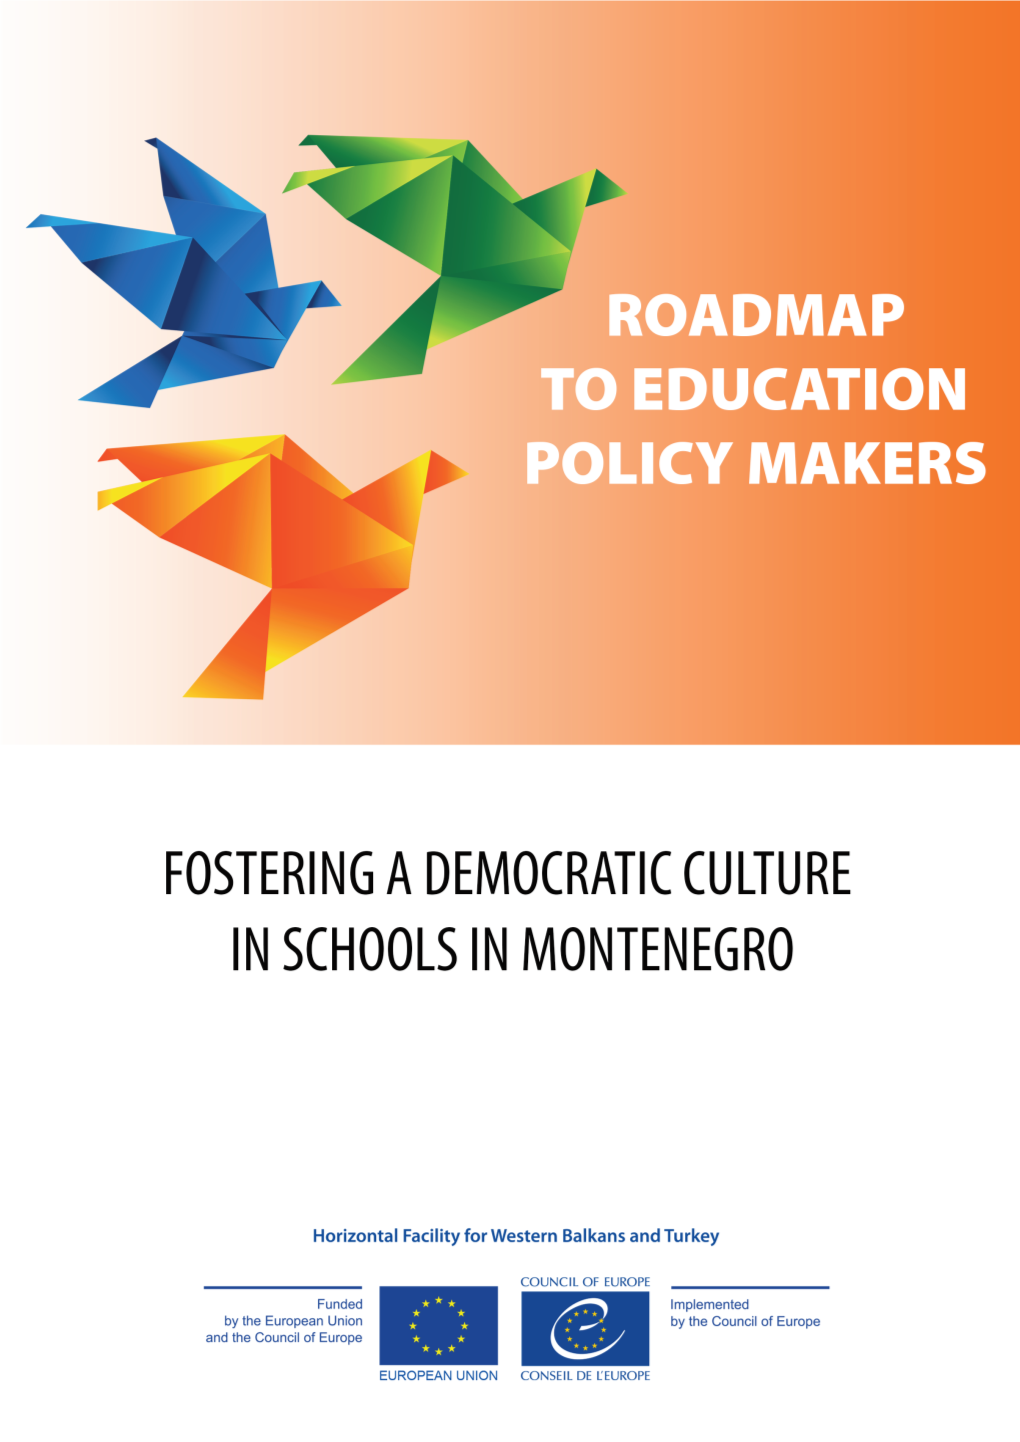 Roadmap to Education Policy for Fostering Democratic School Culture in Montenegro